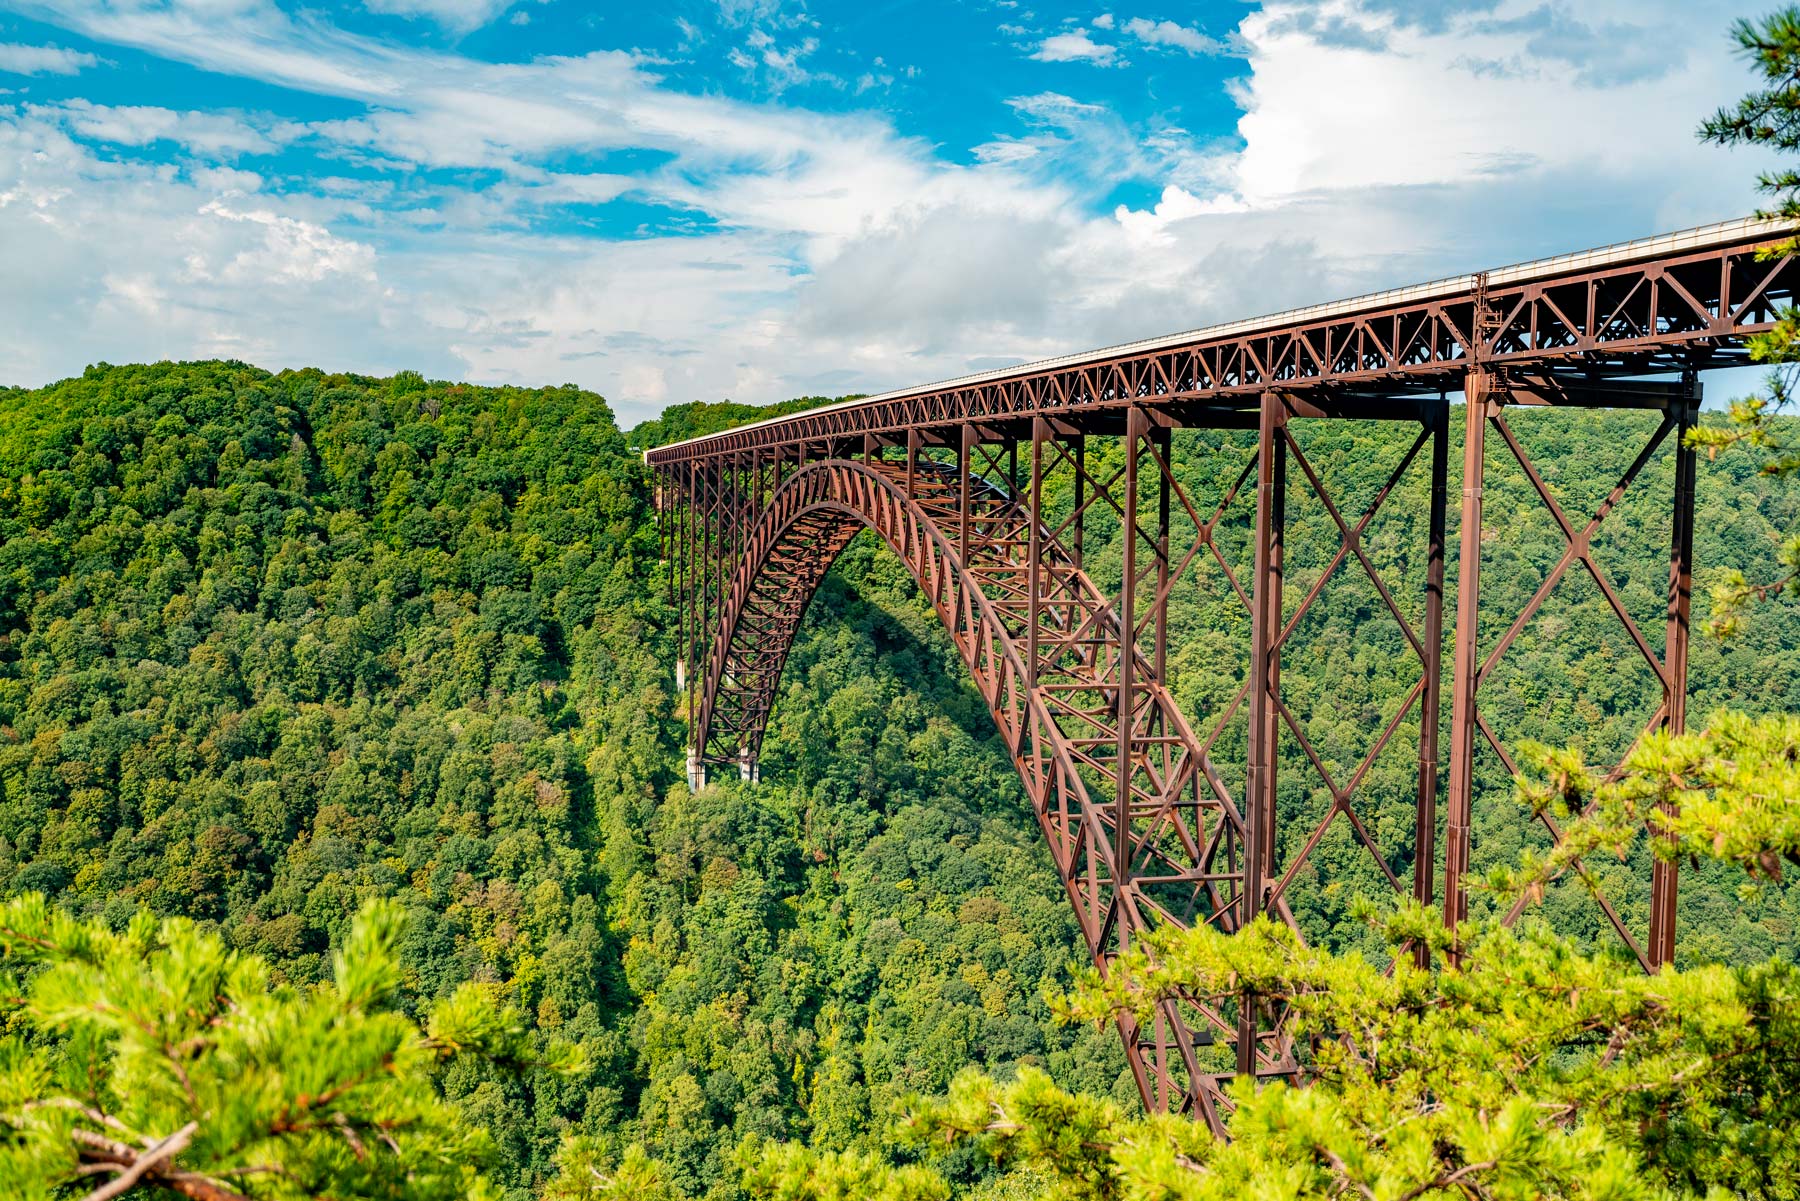 things to do new river gorge national park, new river gorge national park west virginia, bridge overlook